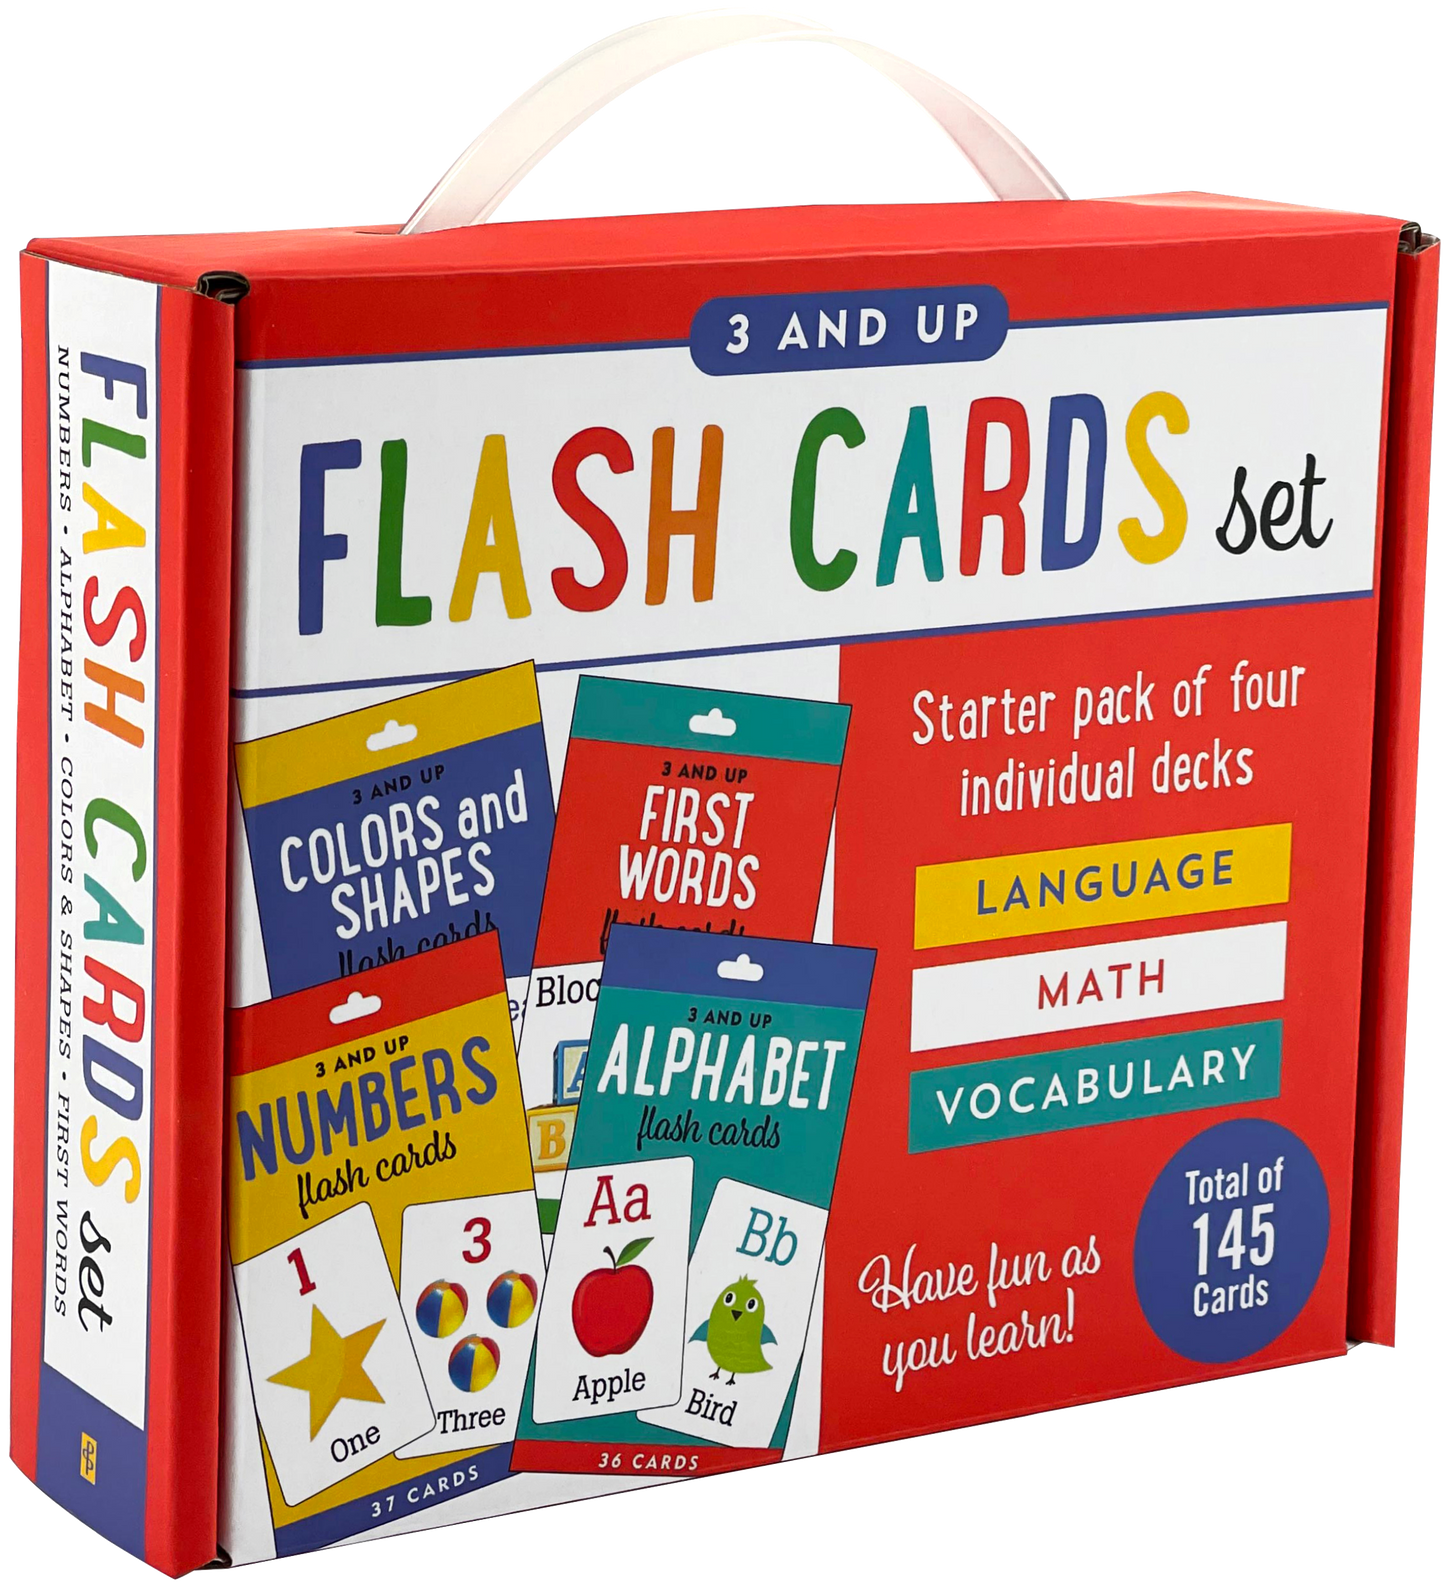 Flash Cards Set (Alphabet, Colors and Shapes, First Words, and Numbers)